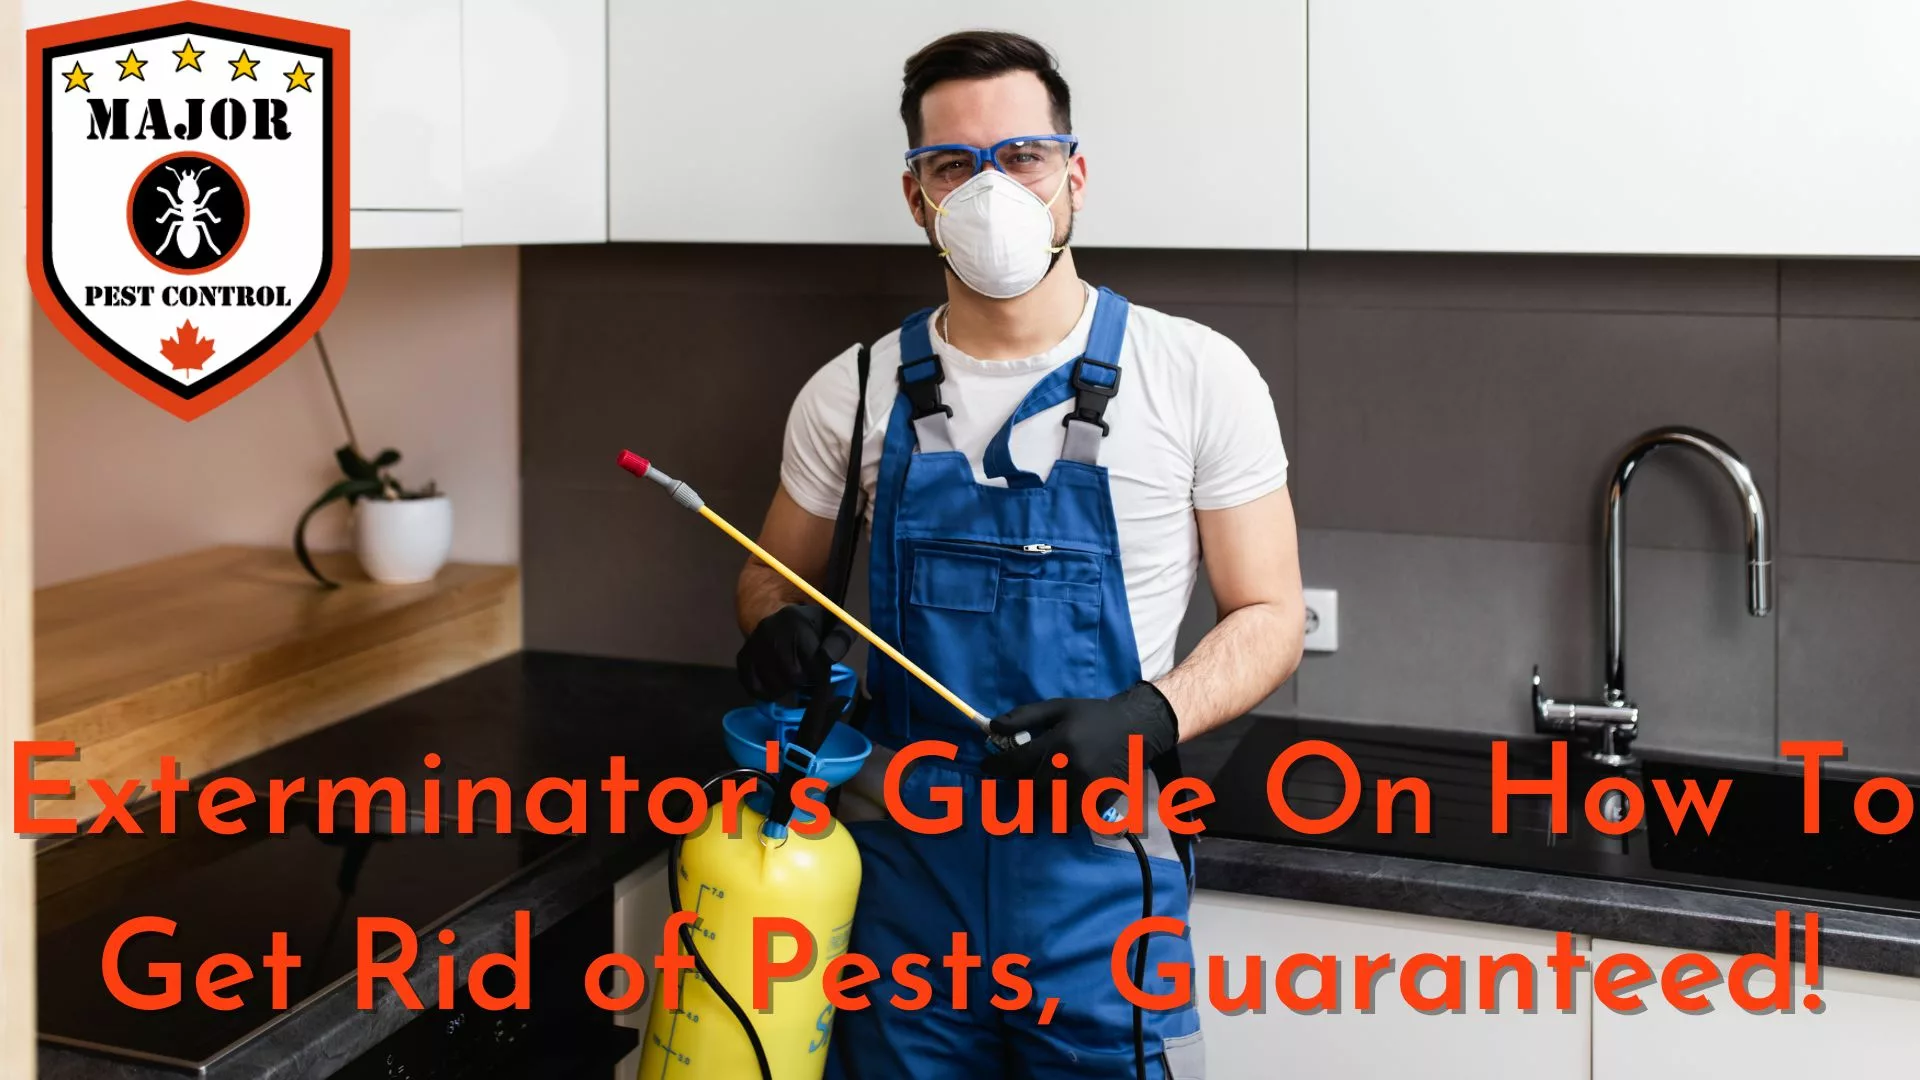 In-Depth Guide On How To Get Rid of Pests, Guaranteed!